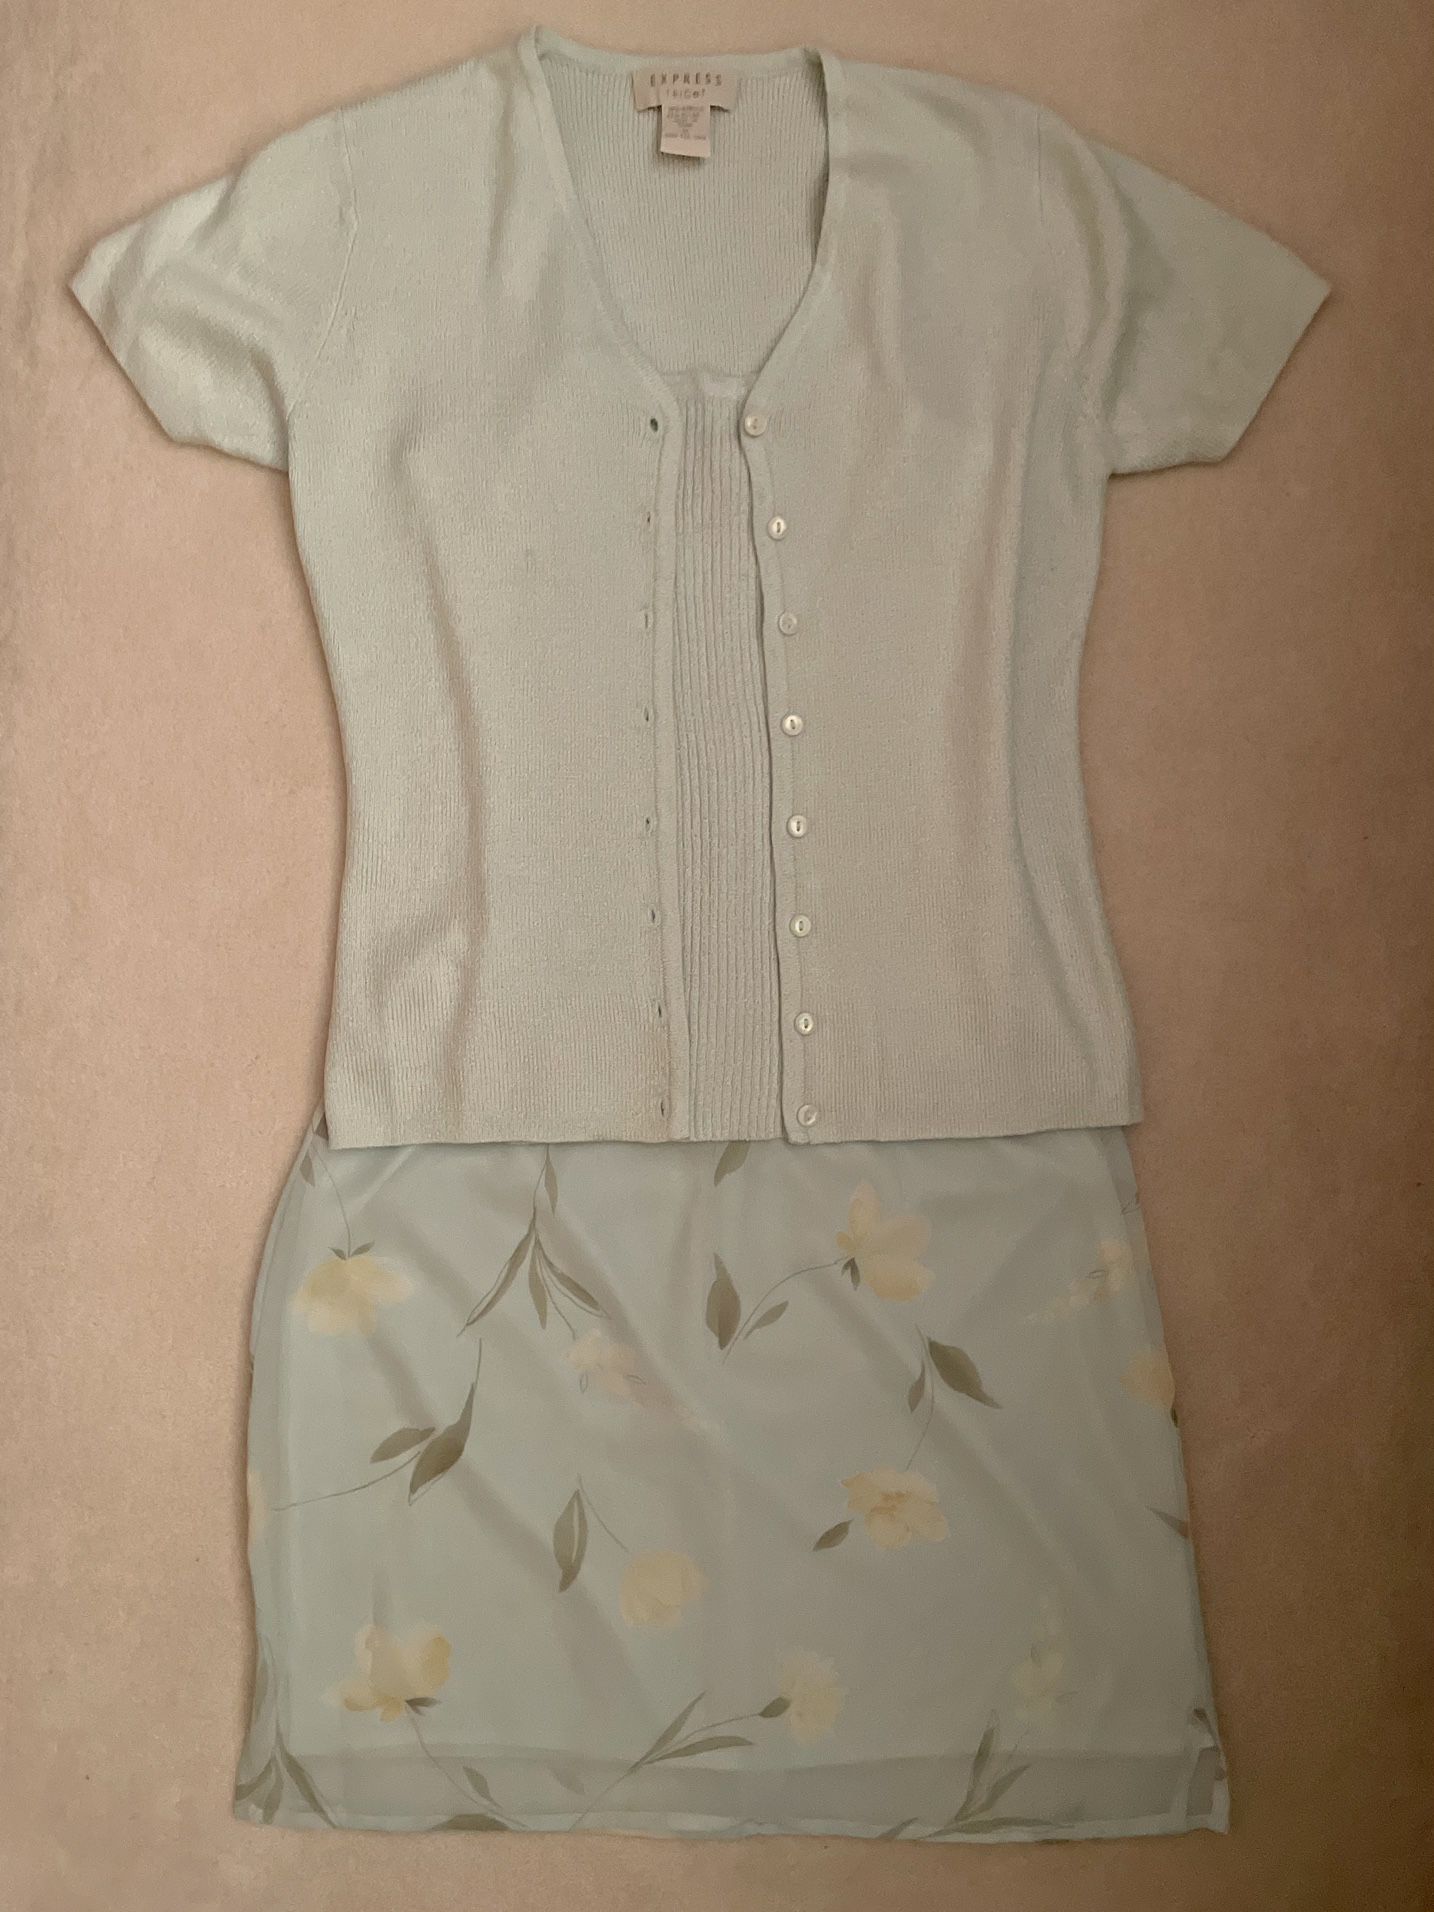 Womens Floral Skirt and Sweater Set, Size Small (3/4)